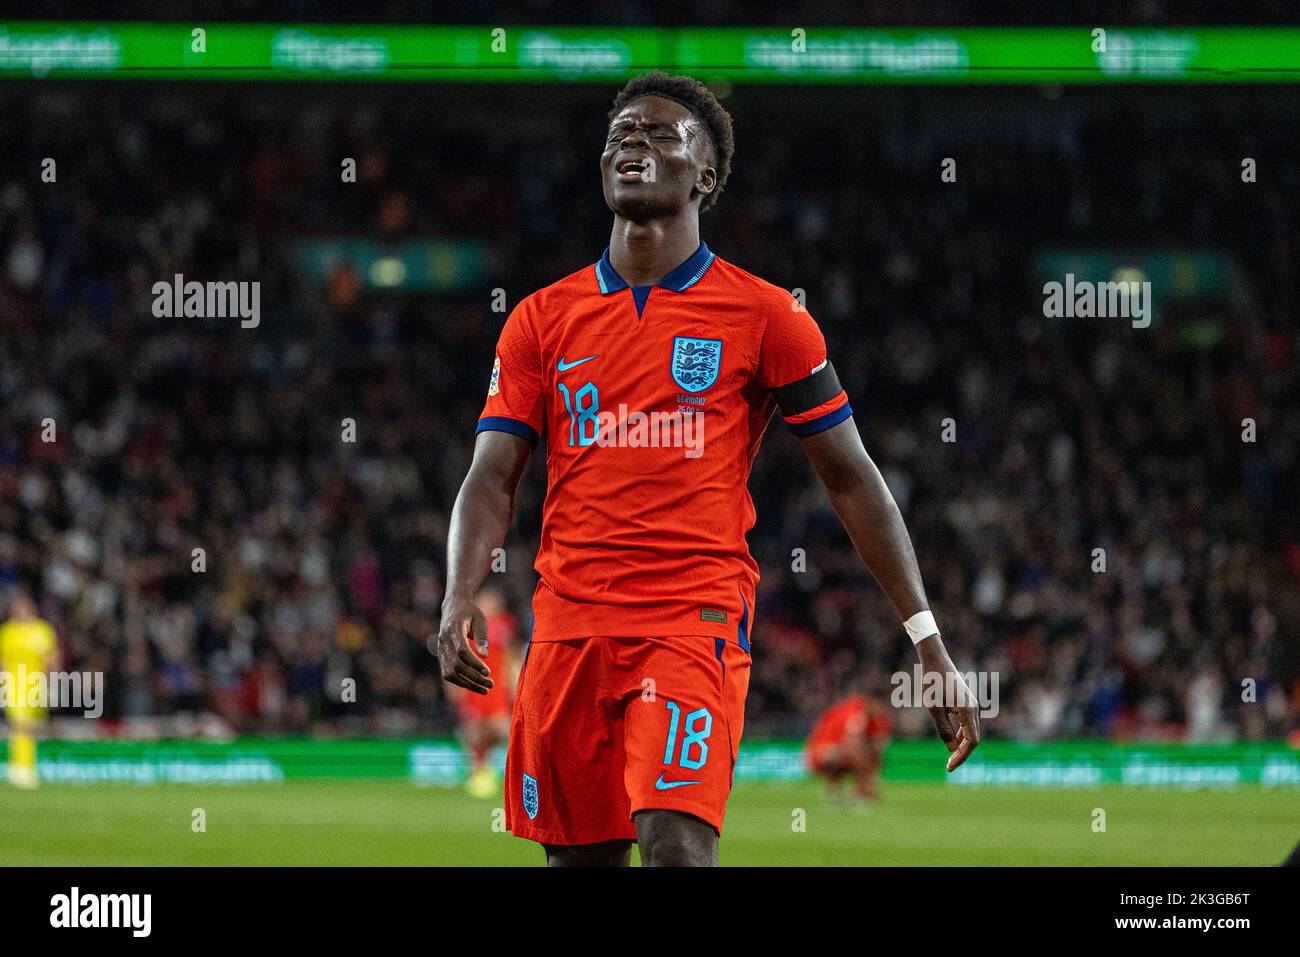 London, Britain. 26th Sep, 2022. Bukayo Saka of England reacts during the League A Group 3 match against Germany at the 2022 UEFA Nations League in London, Britain, Sept. 26, 2022. Credit: Str/Xinhua/Alamy Live News Stock Photo